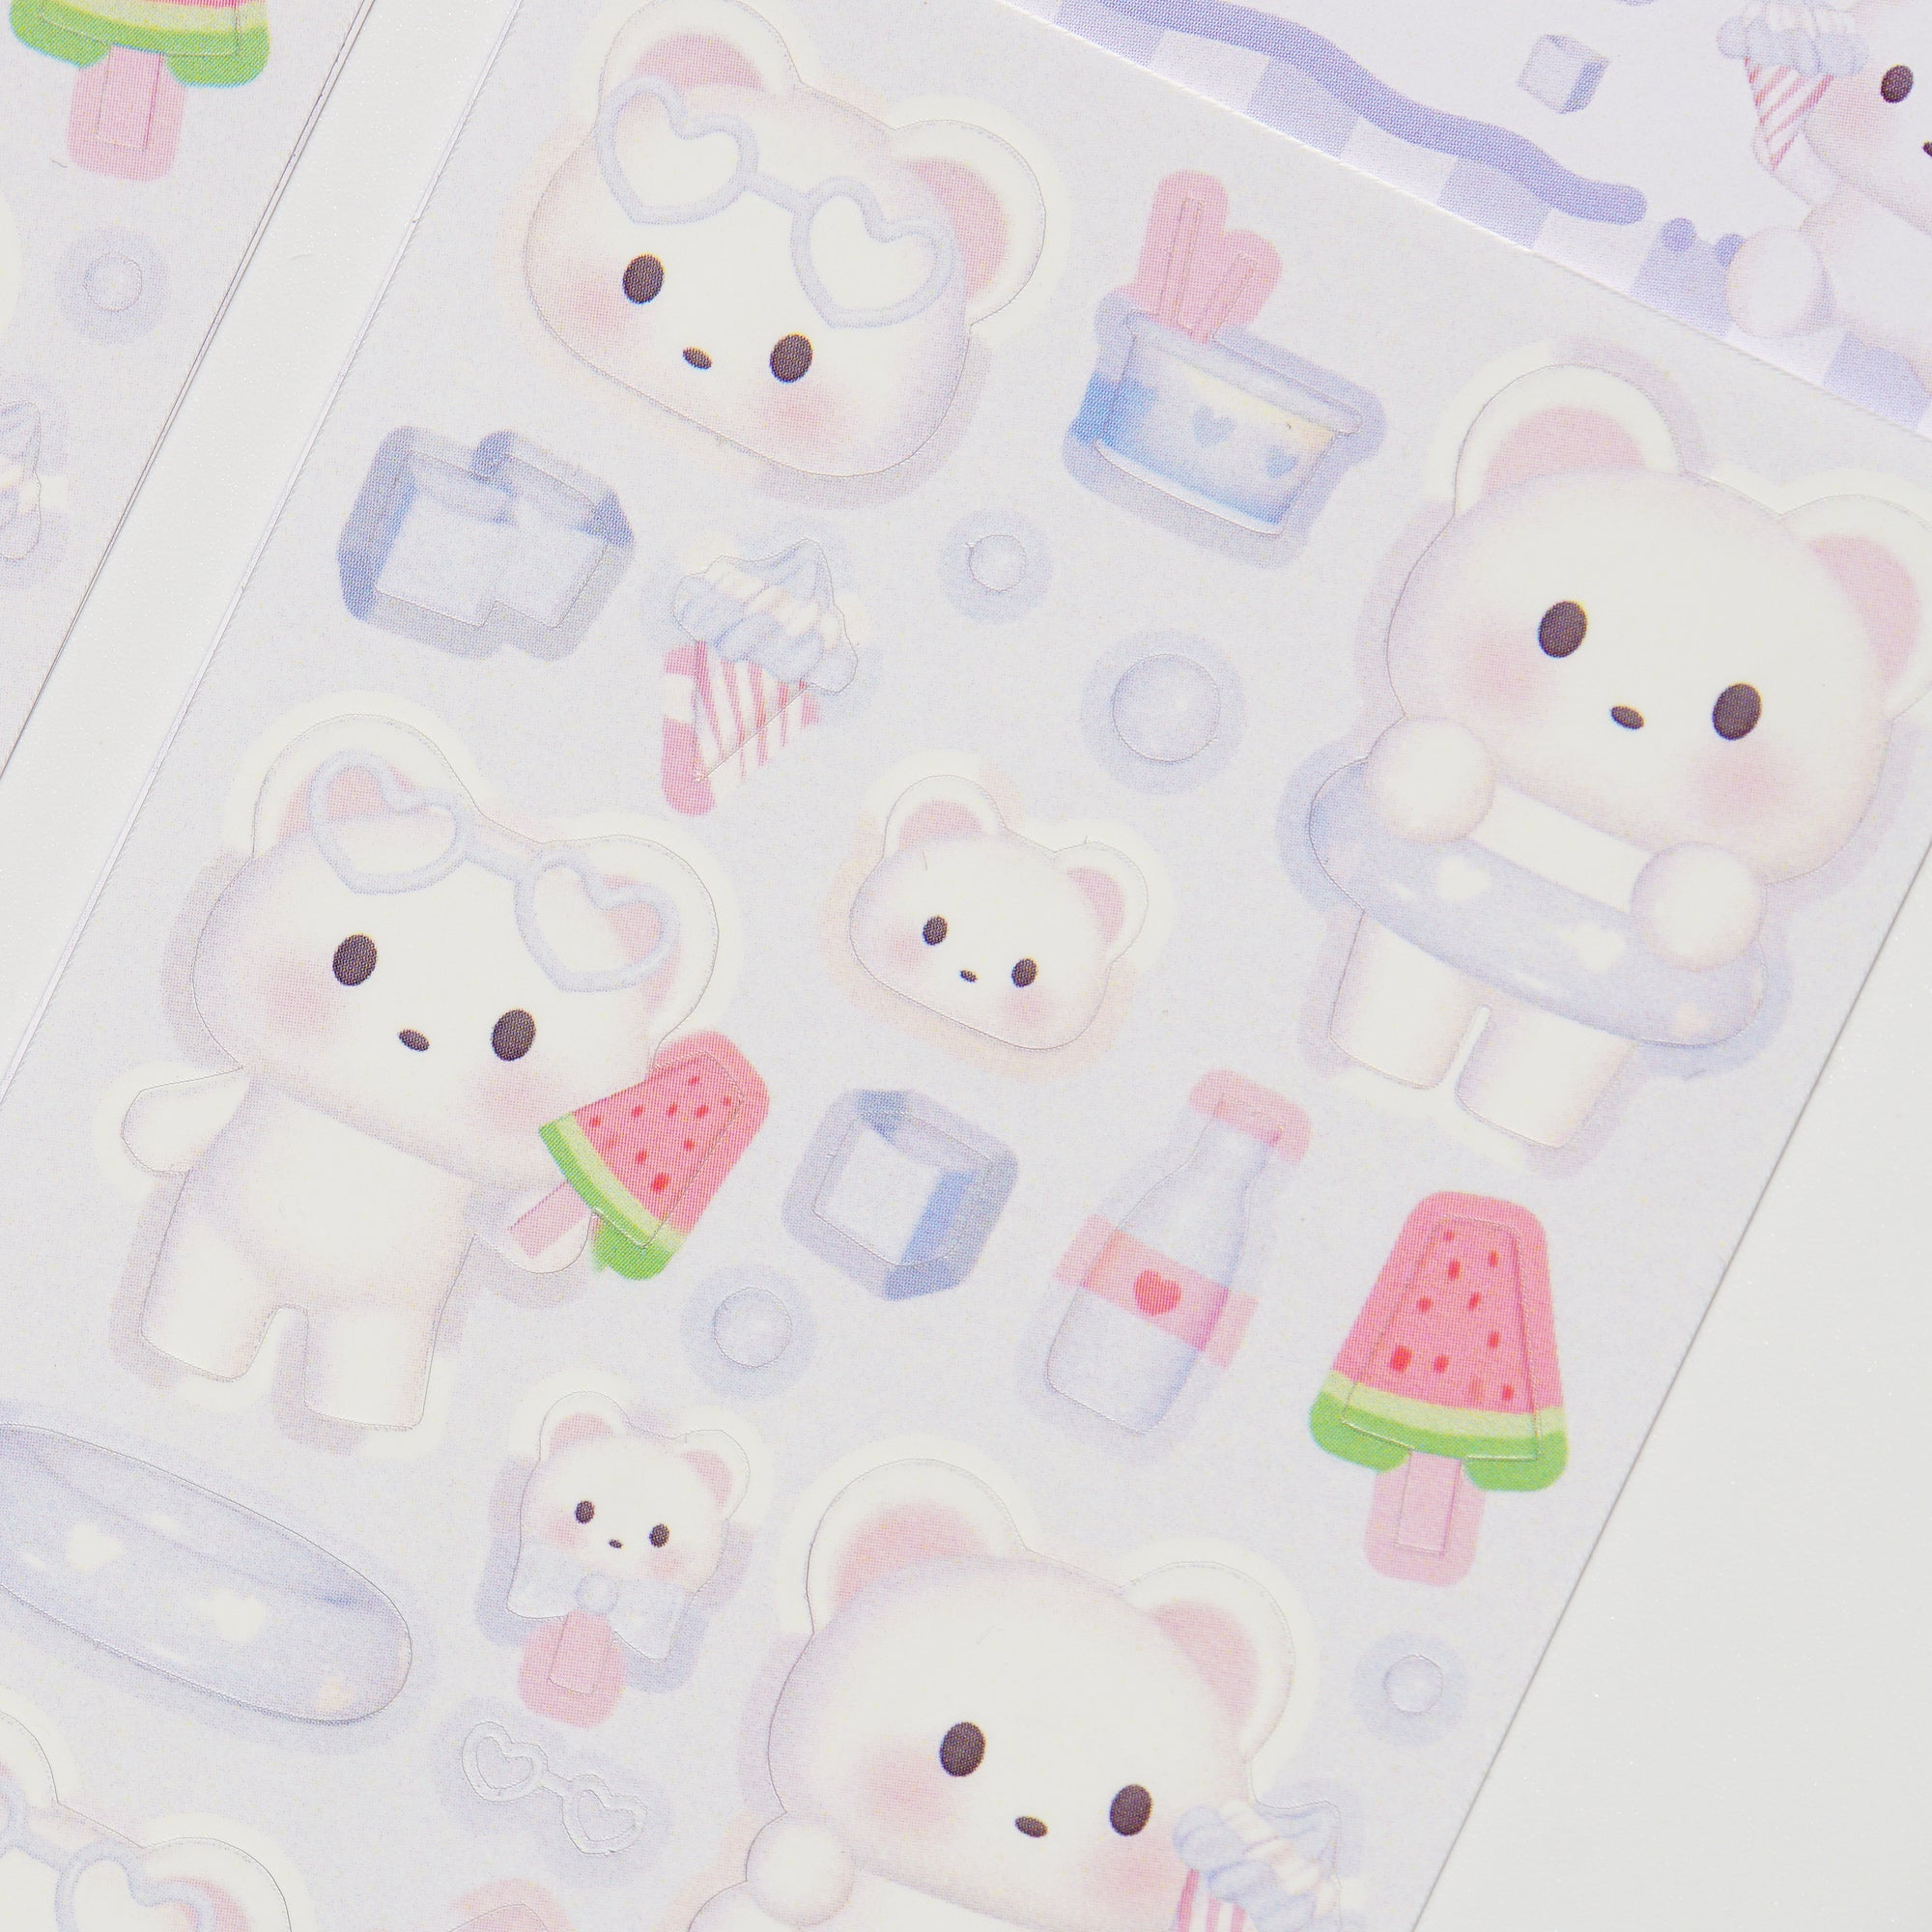 SWEET &amp; SOUR BEAR STICKERS